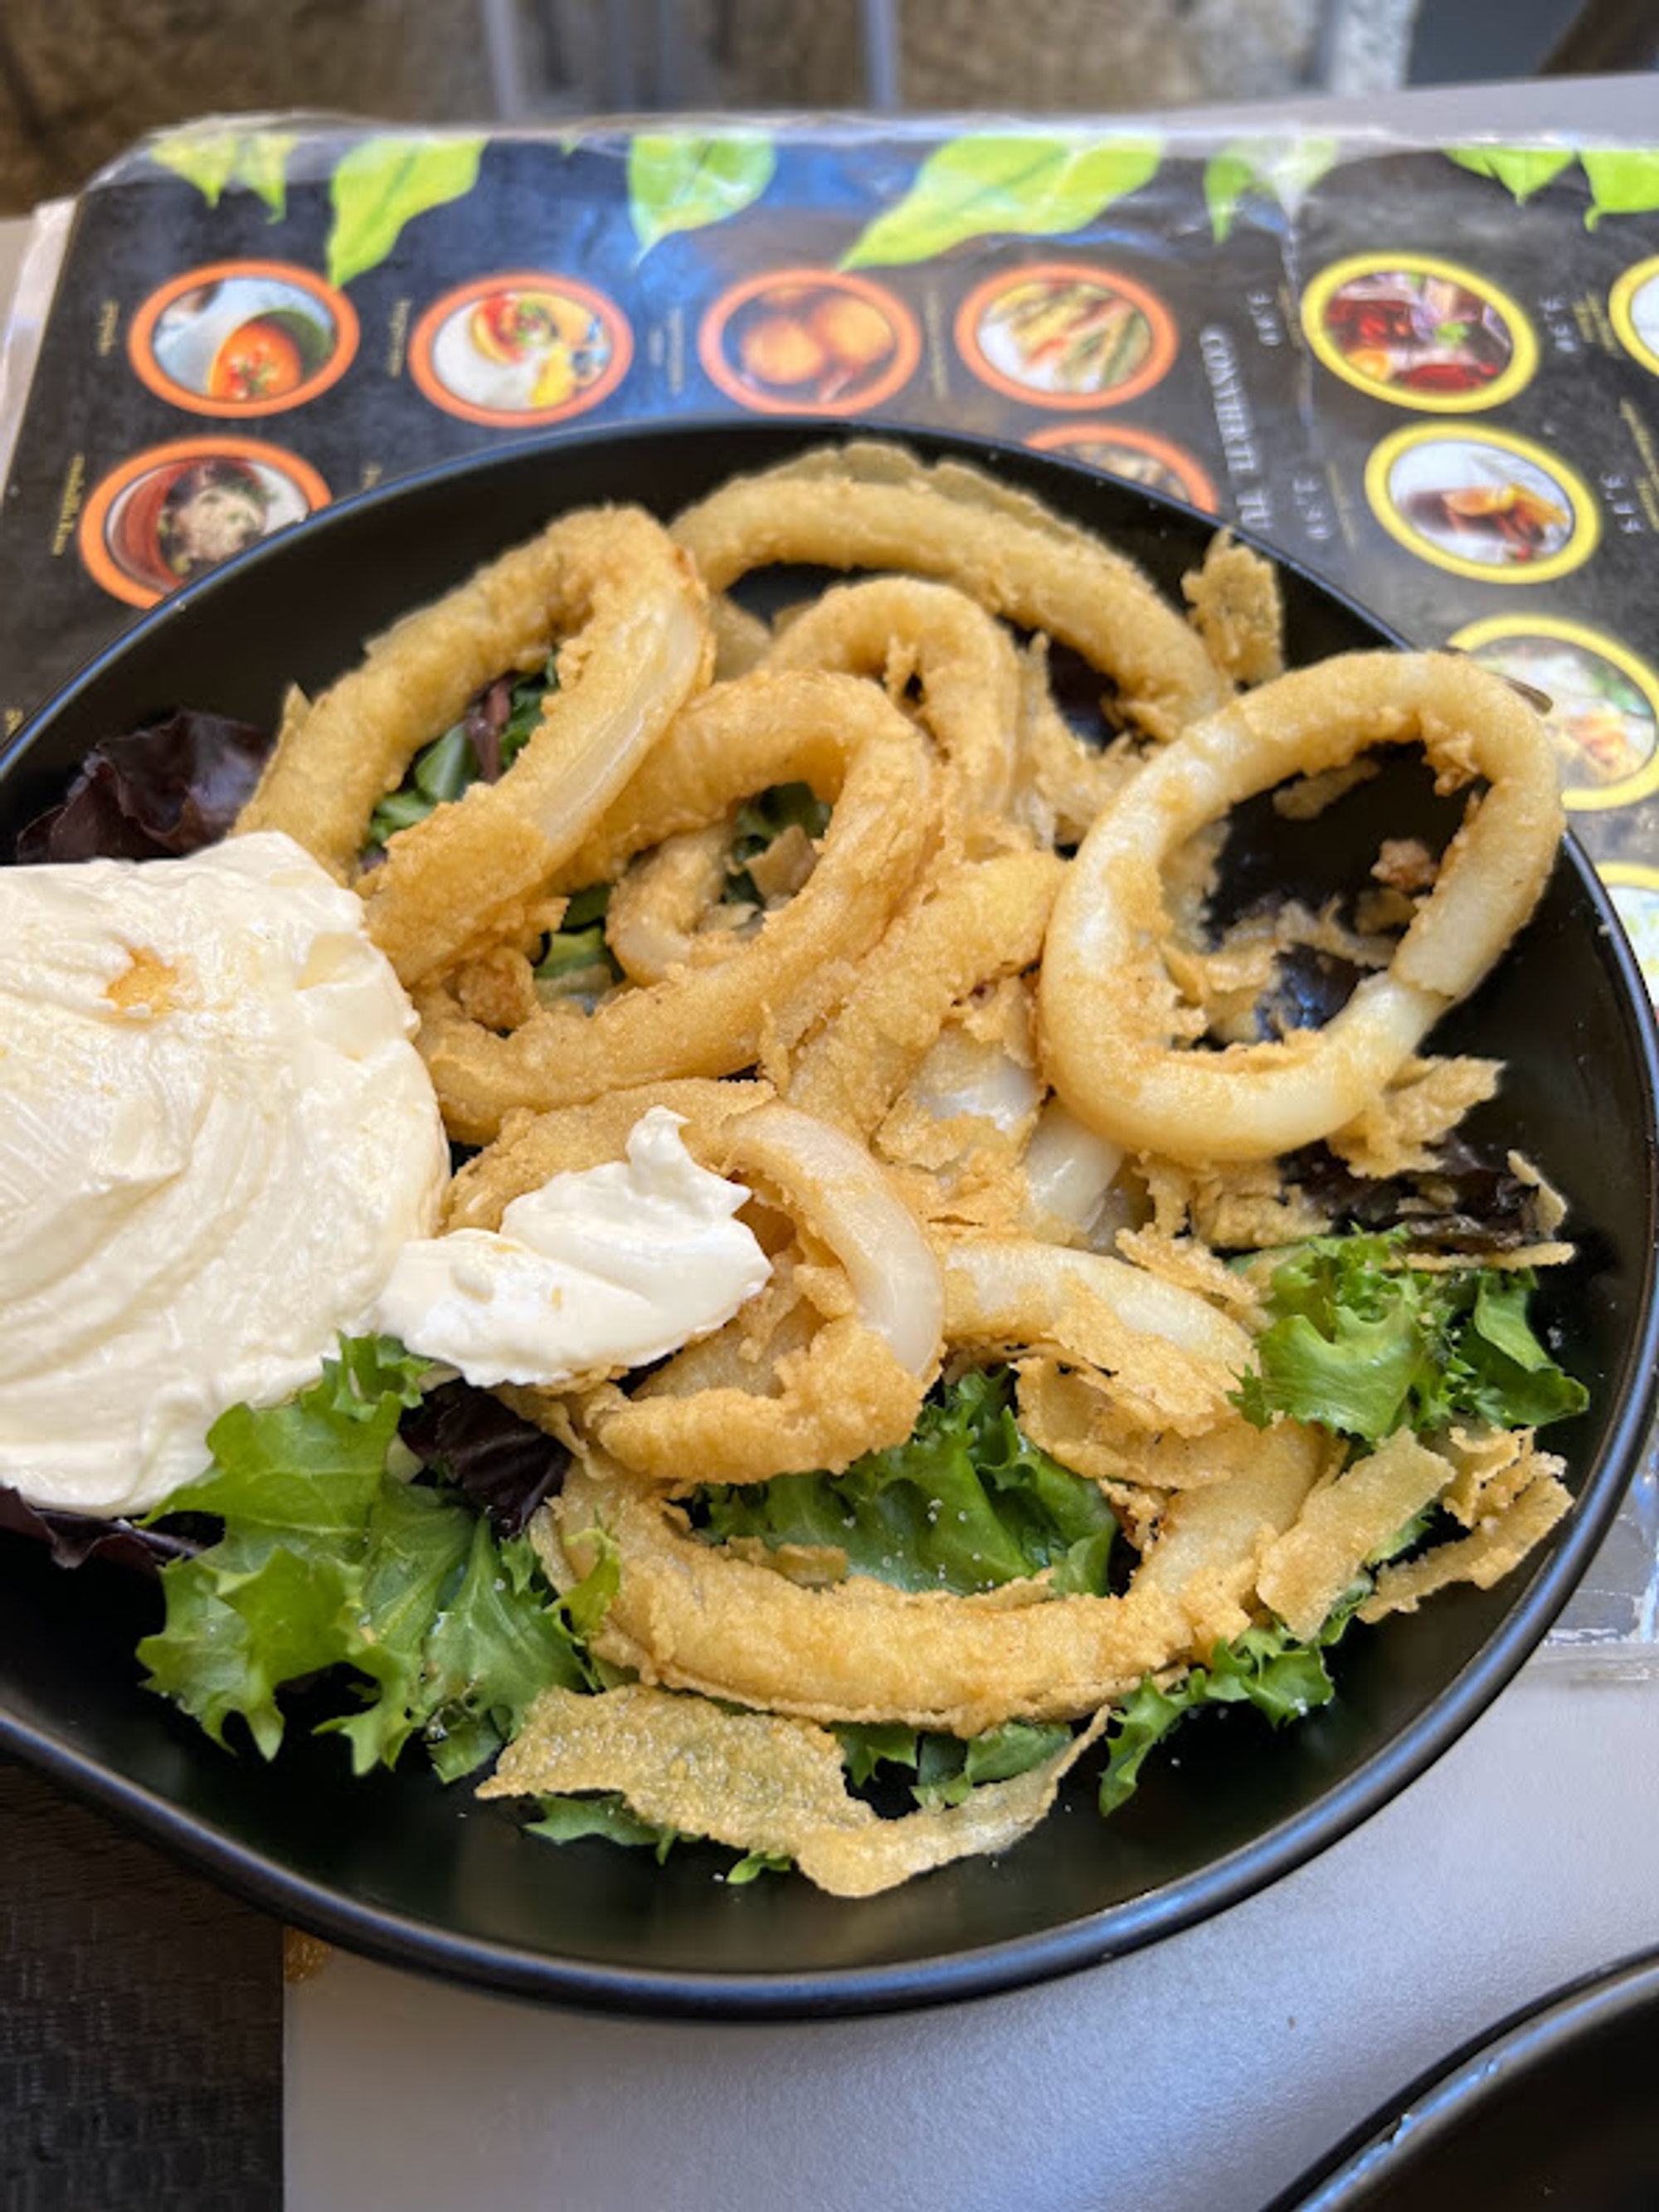 And this was our NASTY lunch. Those are NOT calamari….